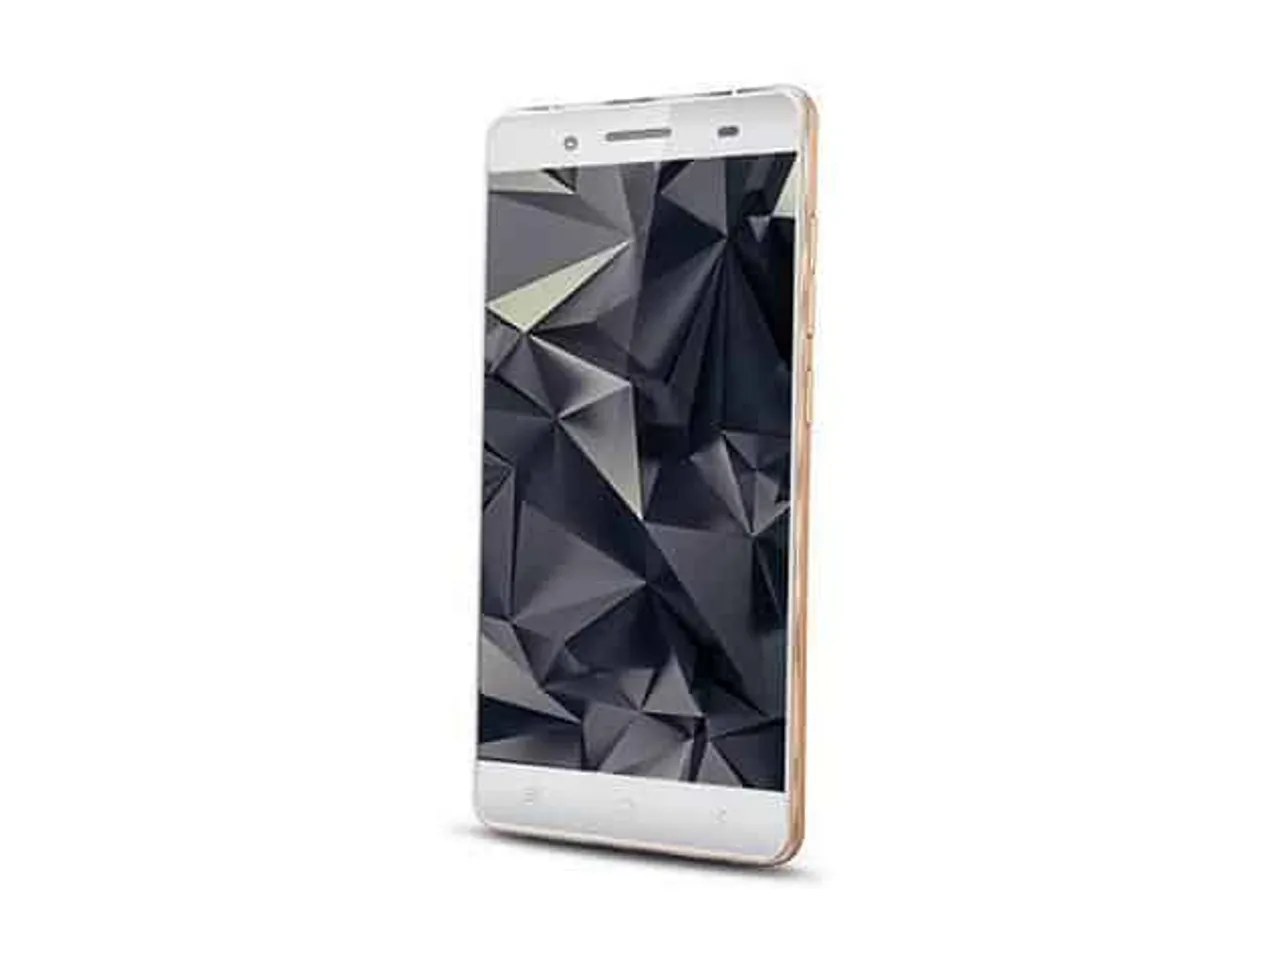 iBall Cobalt Solus 4G available at Rs 11,999